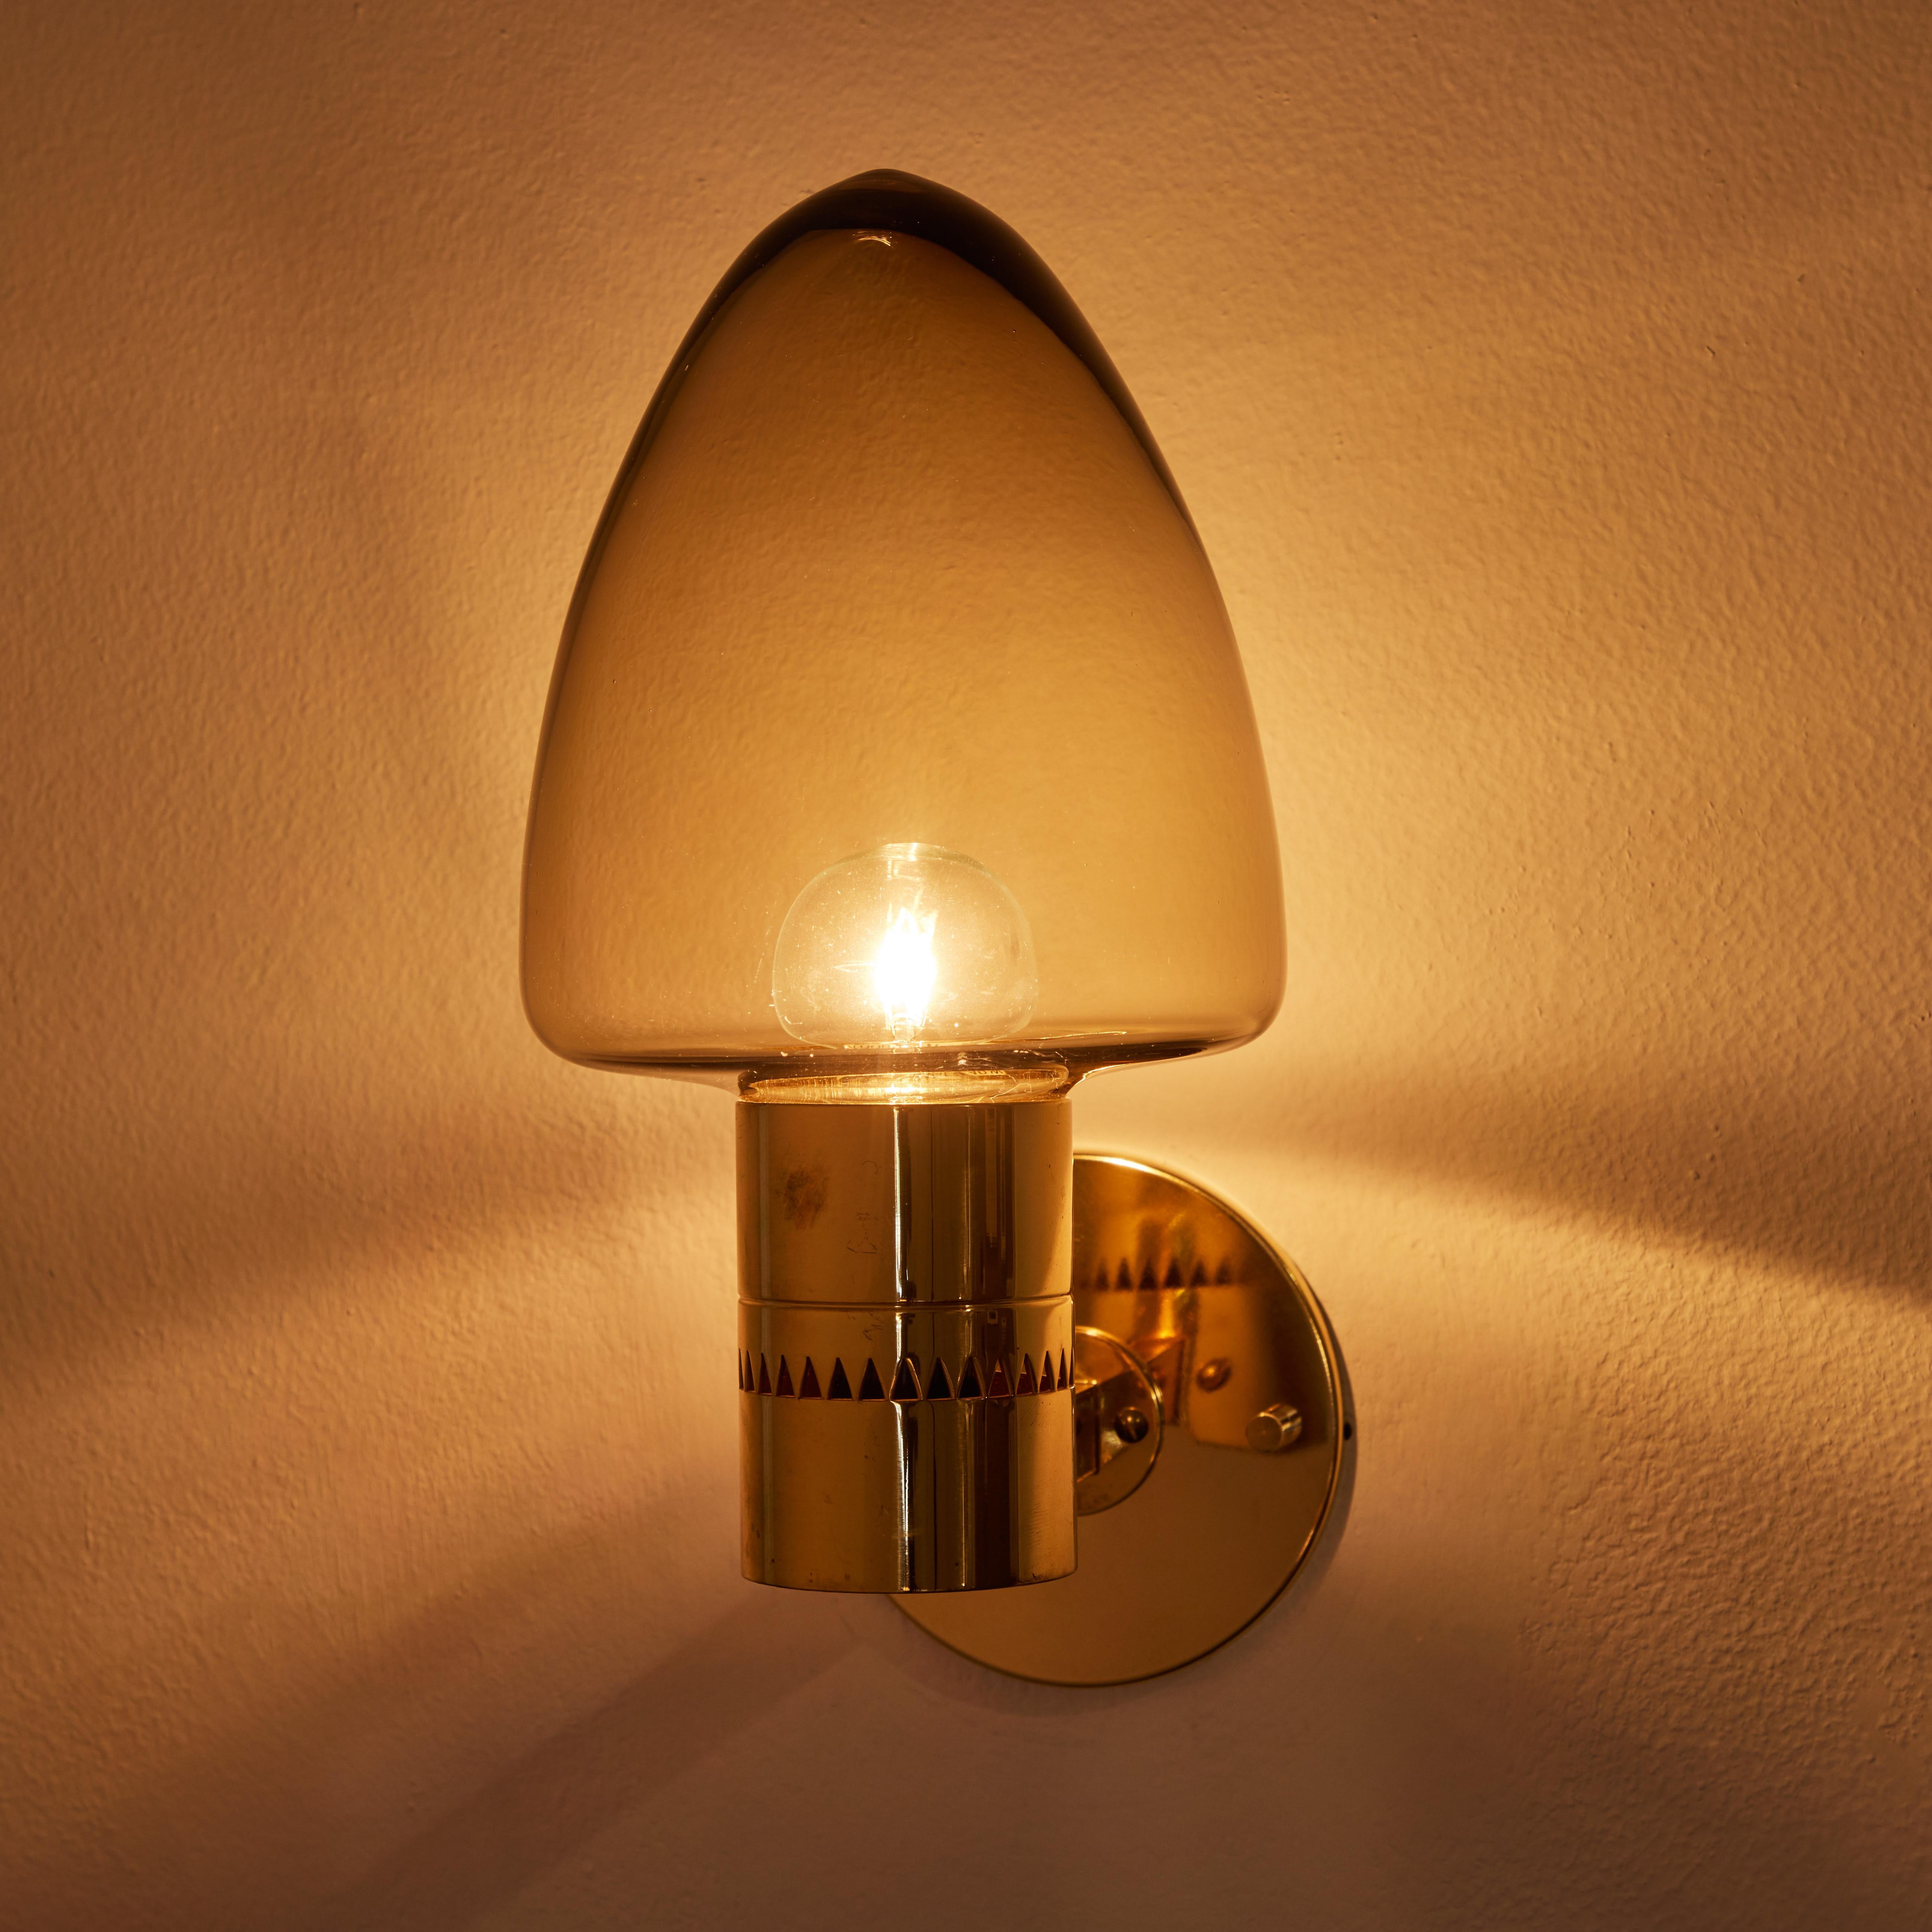 Pair of 1960s Hans-Agne Jakobsson Model V-220 brass & glass sconces for Markaryd. An incredibly refined vintage design that is quintessentially Swedish. Executed in sculpturally bent brass and blown smoked glass.

Price is for the pair.

Rewired